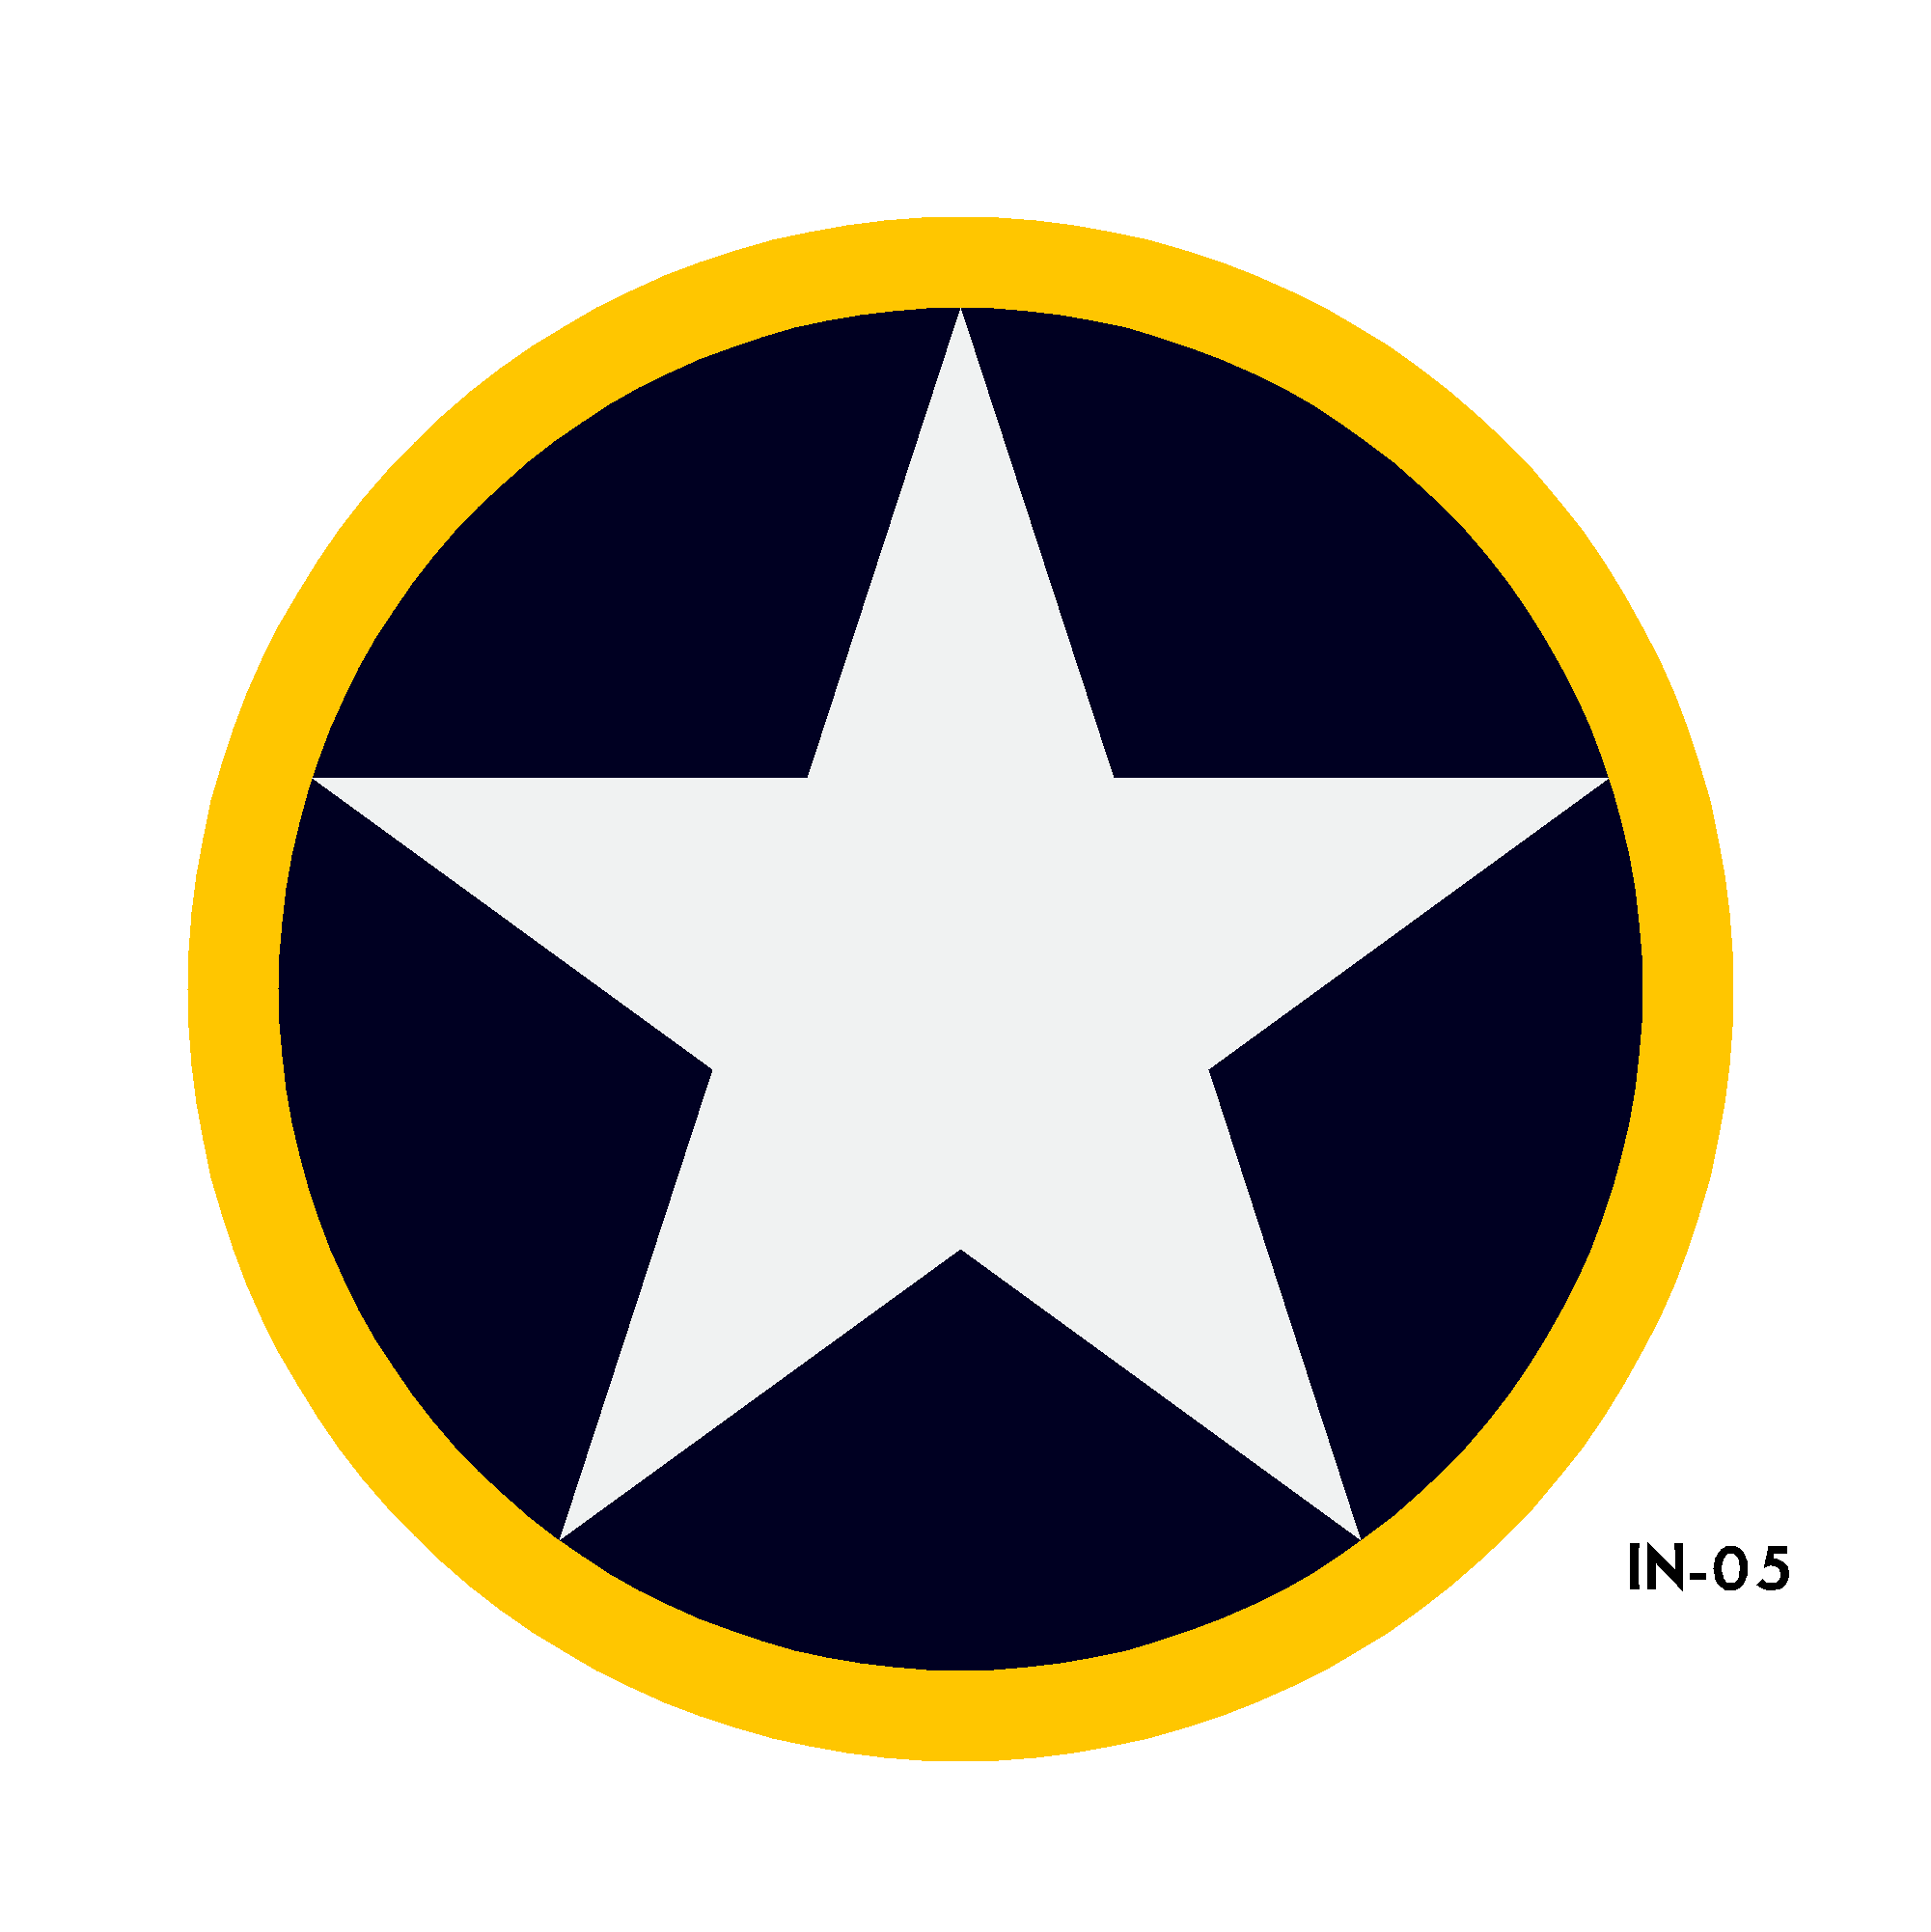 U.S. Army Air Force National Star in Circle with Yellow Outline Insignia Vinyl - Spec. No. 24102-K 